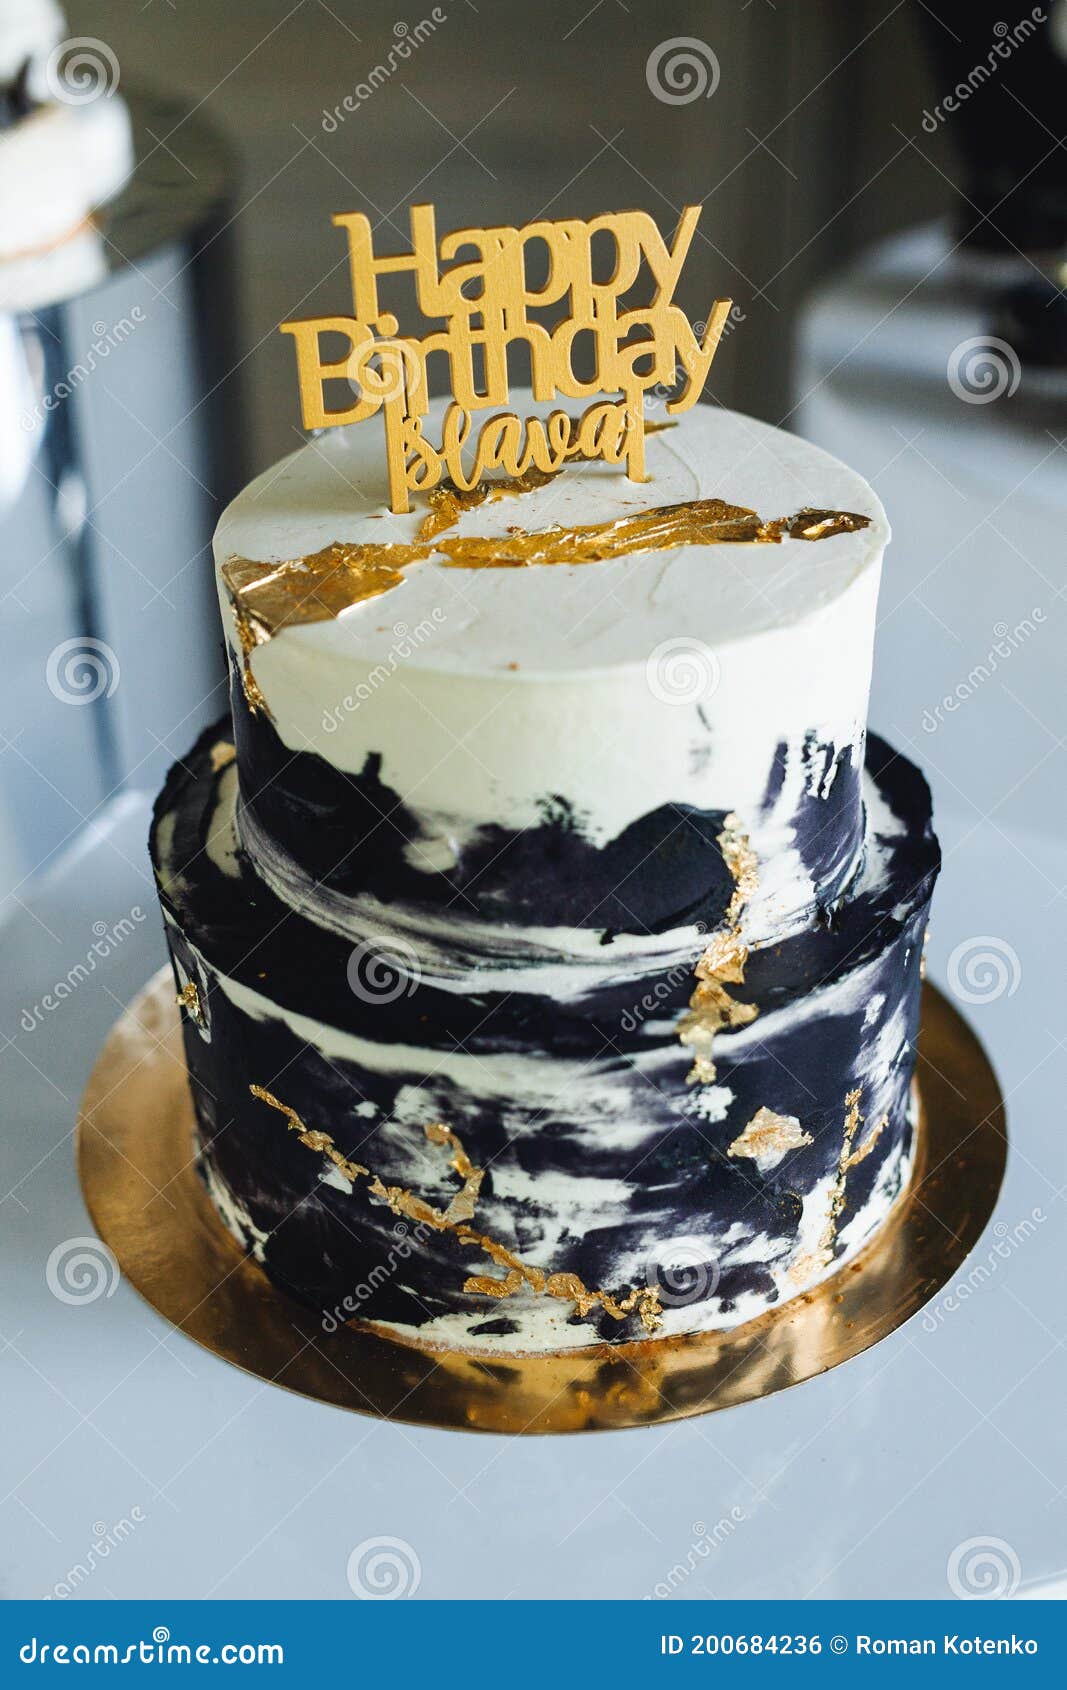 Close Up Of Fresh Delicious Birthday Cake With Words Candles On Gold Plate Stock Photo Image Of Gift Present 200684236